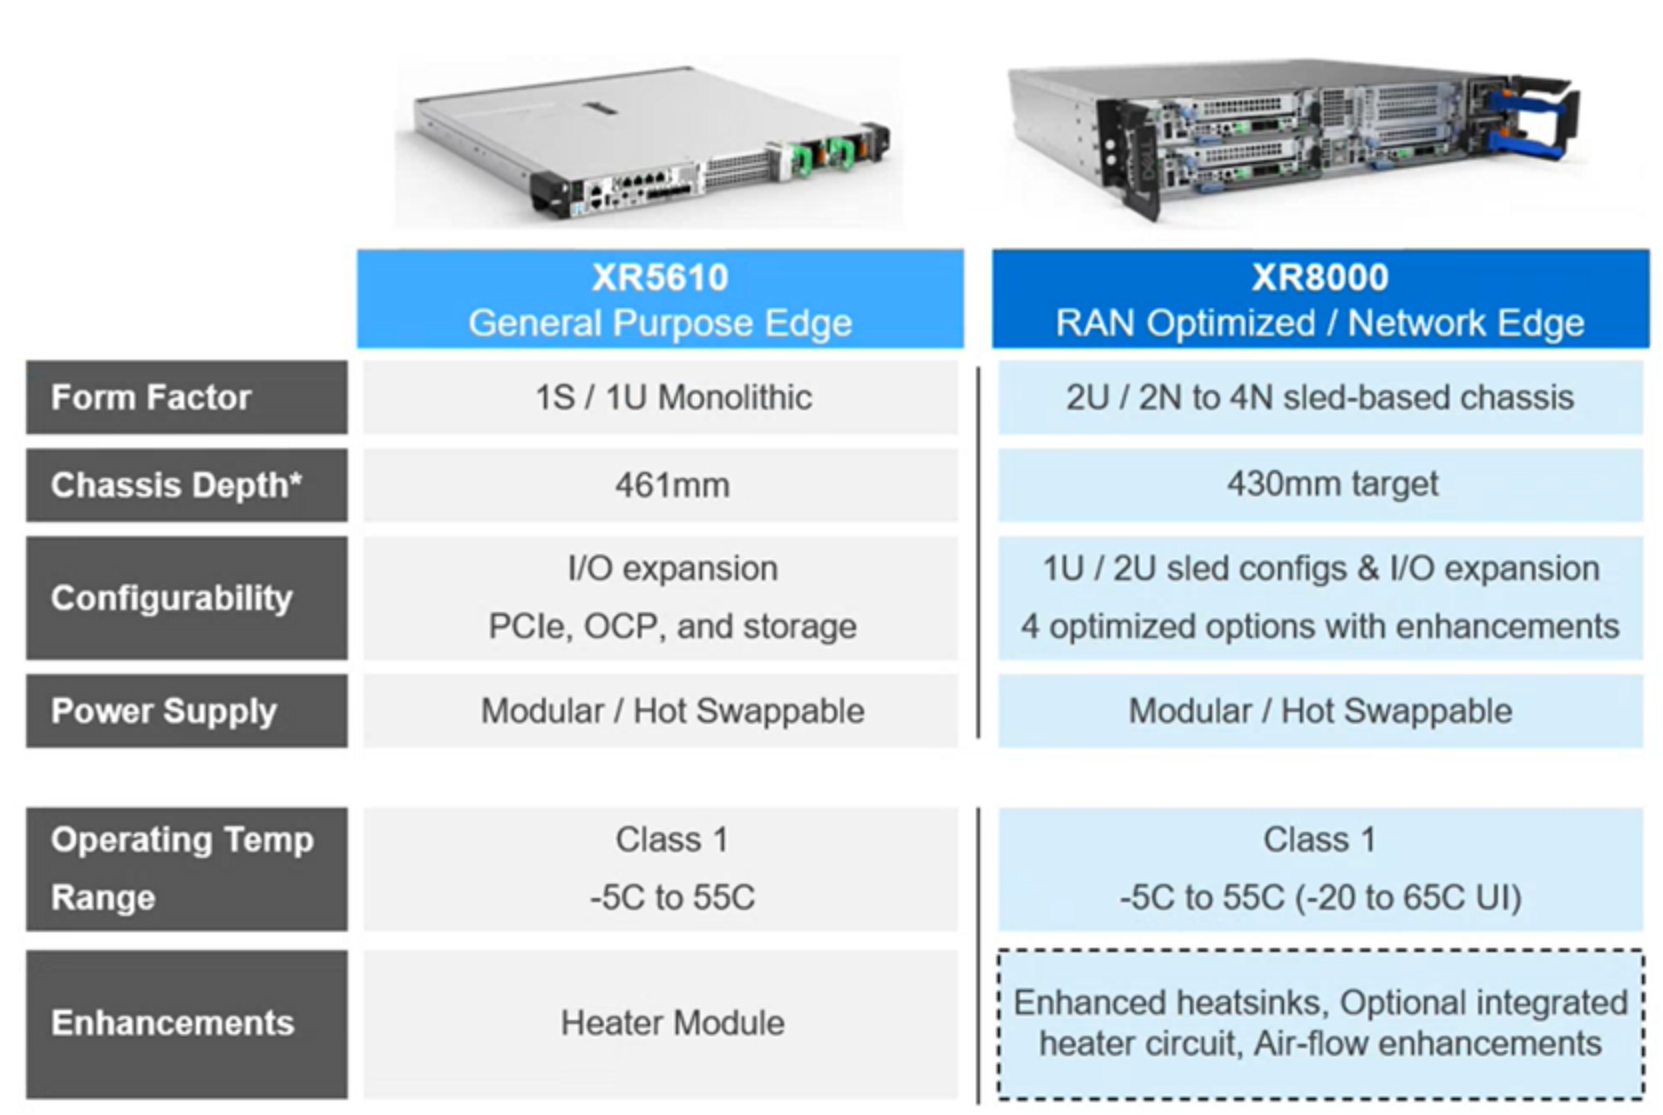 Figure 5 compares the physical features of the XR5610 and XR8000. This includes form factor, chassis depth, configurability, power supply, operating temperature range, and enhancements.